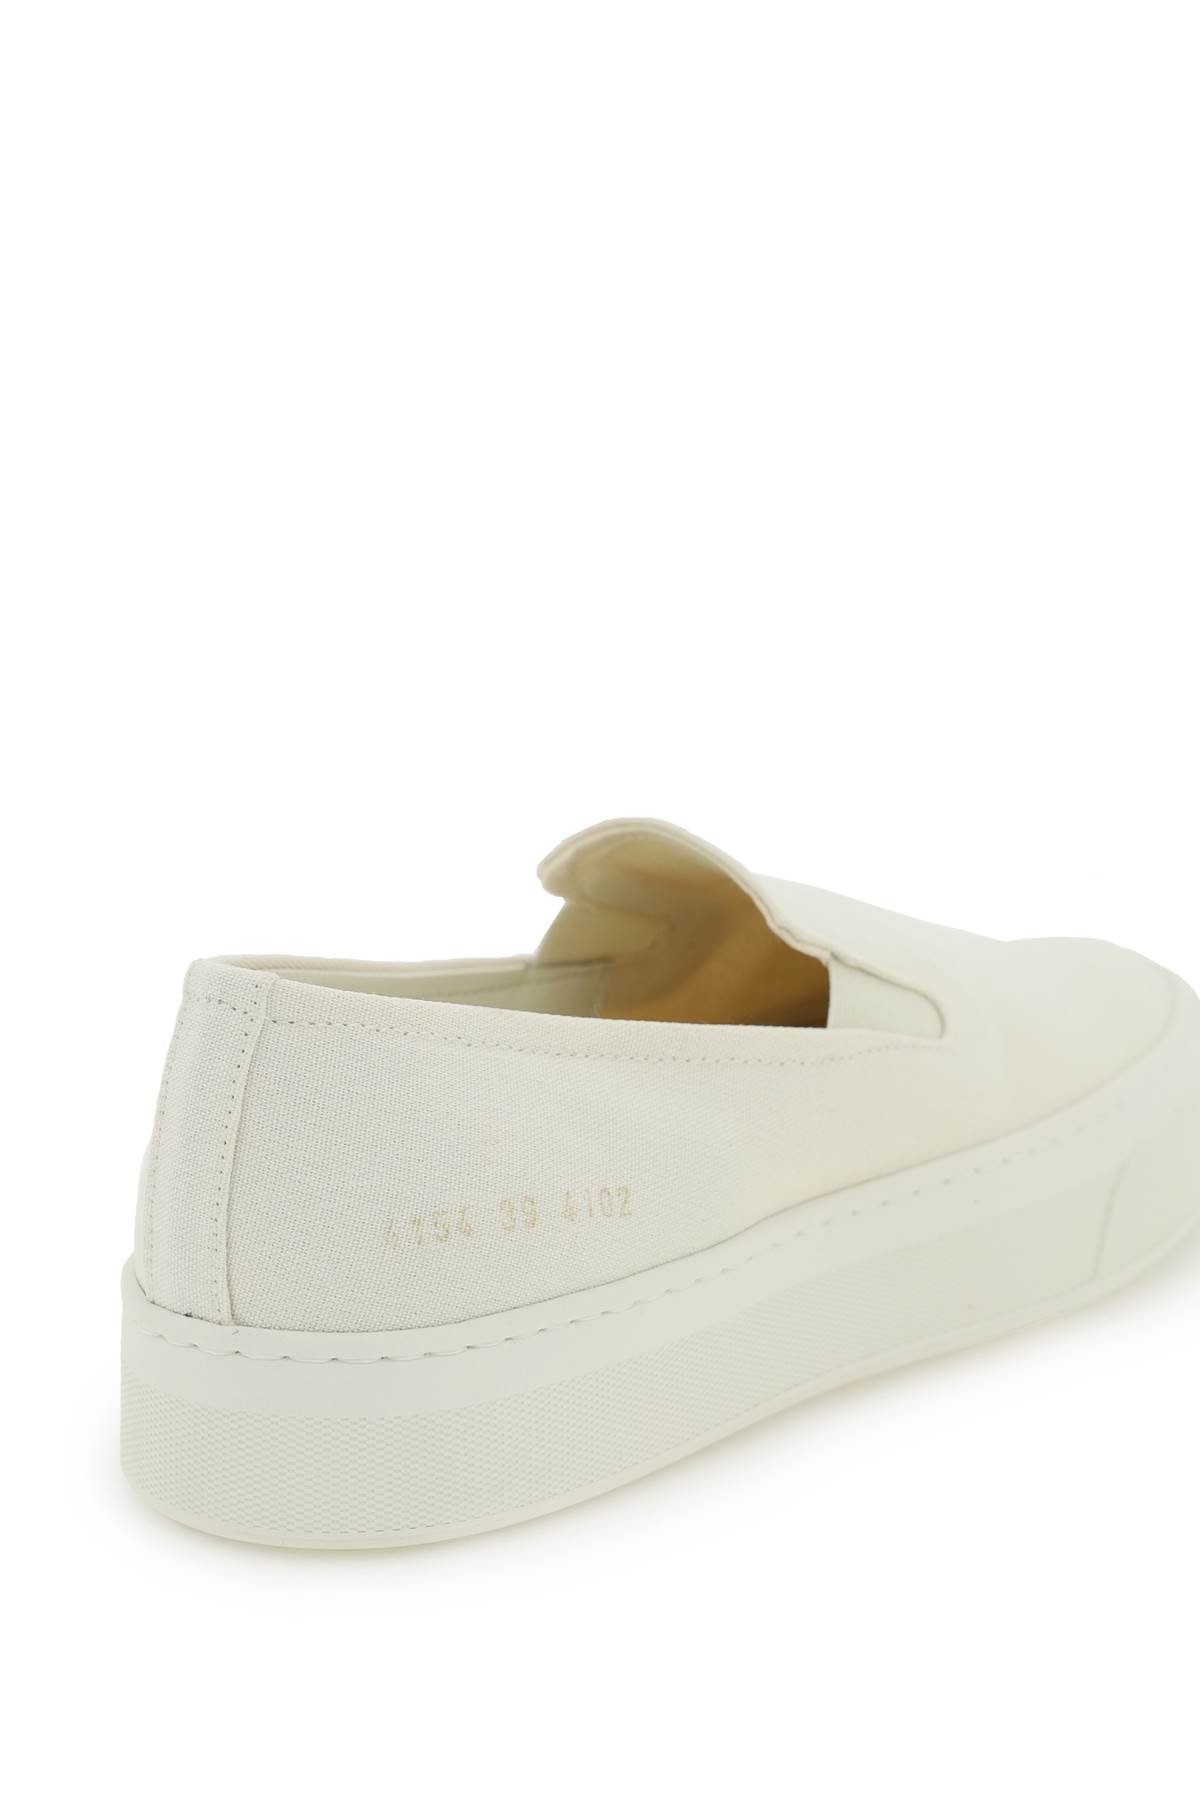 Shop Common Projects Slip-on Sneakers In Off White (white)